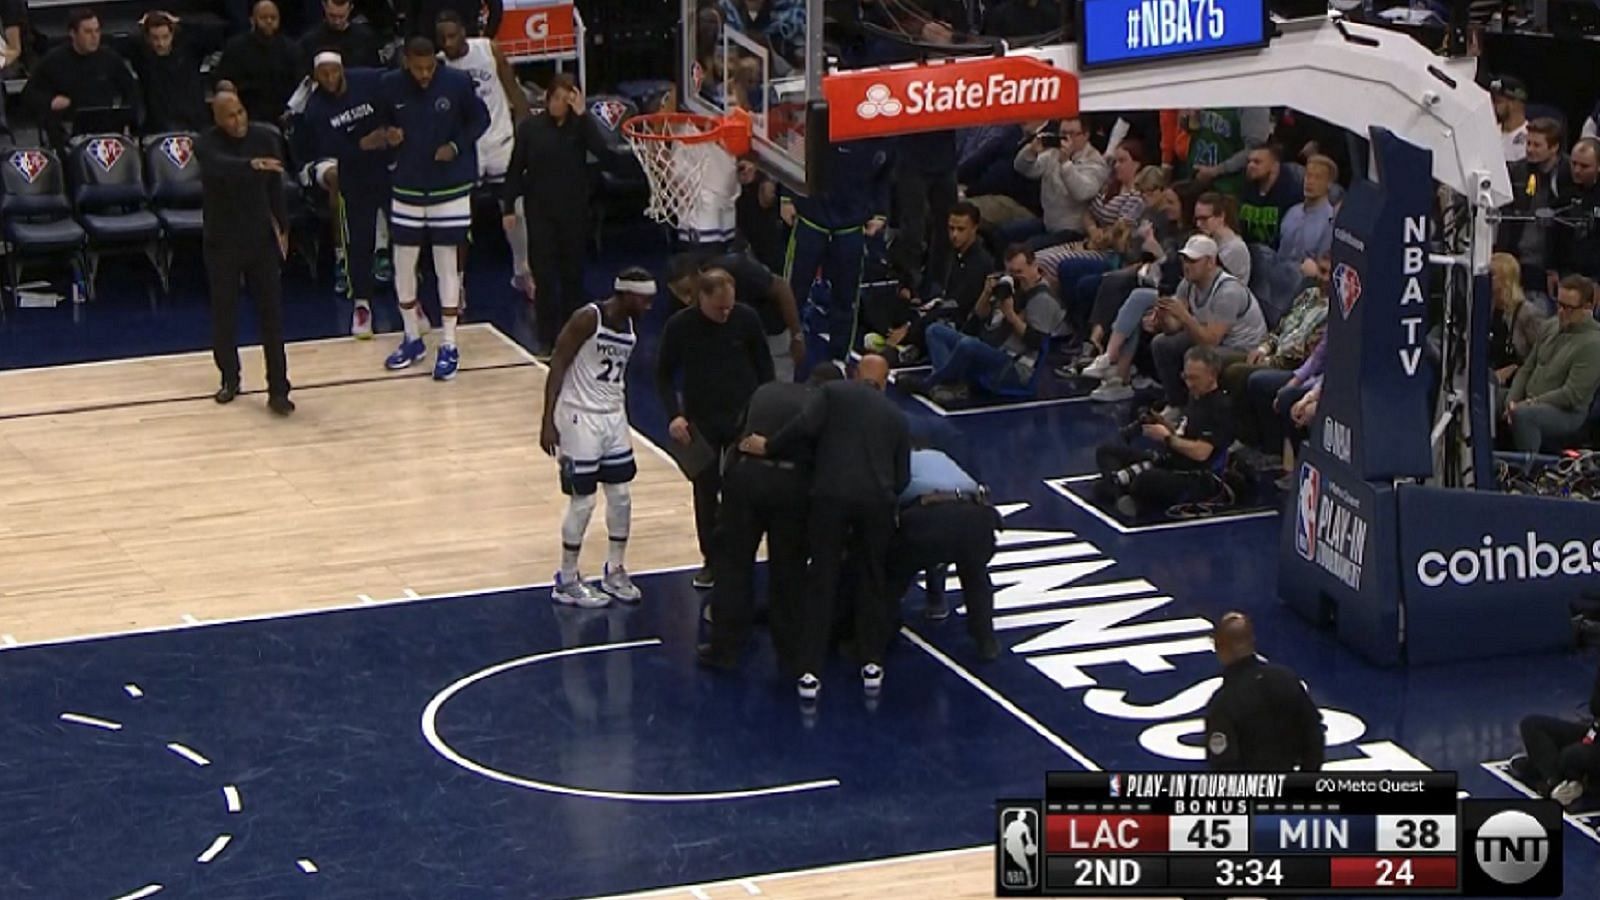 An unknown protester glued herself to the floor of the Target Center to briefly stop the game between the LA Clippers and Minnesota Timberwolves. [Photo: Larry Brown Sports]